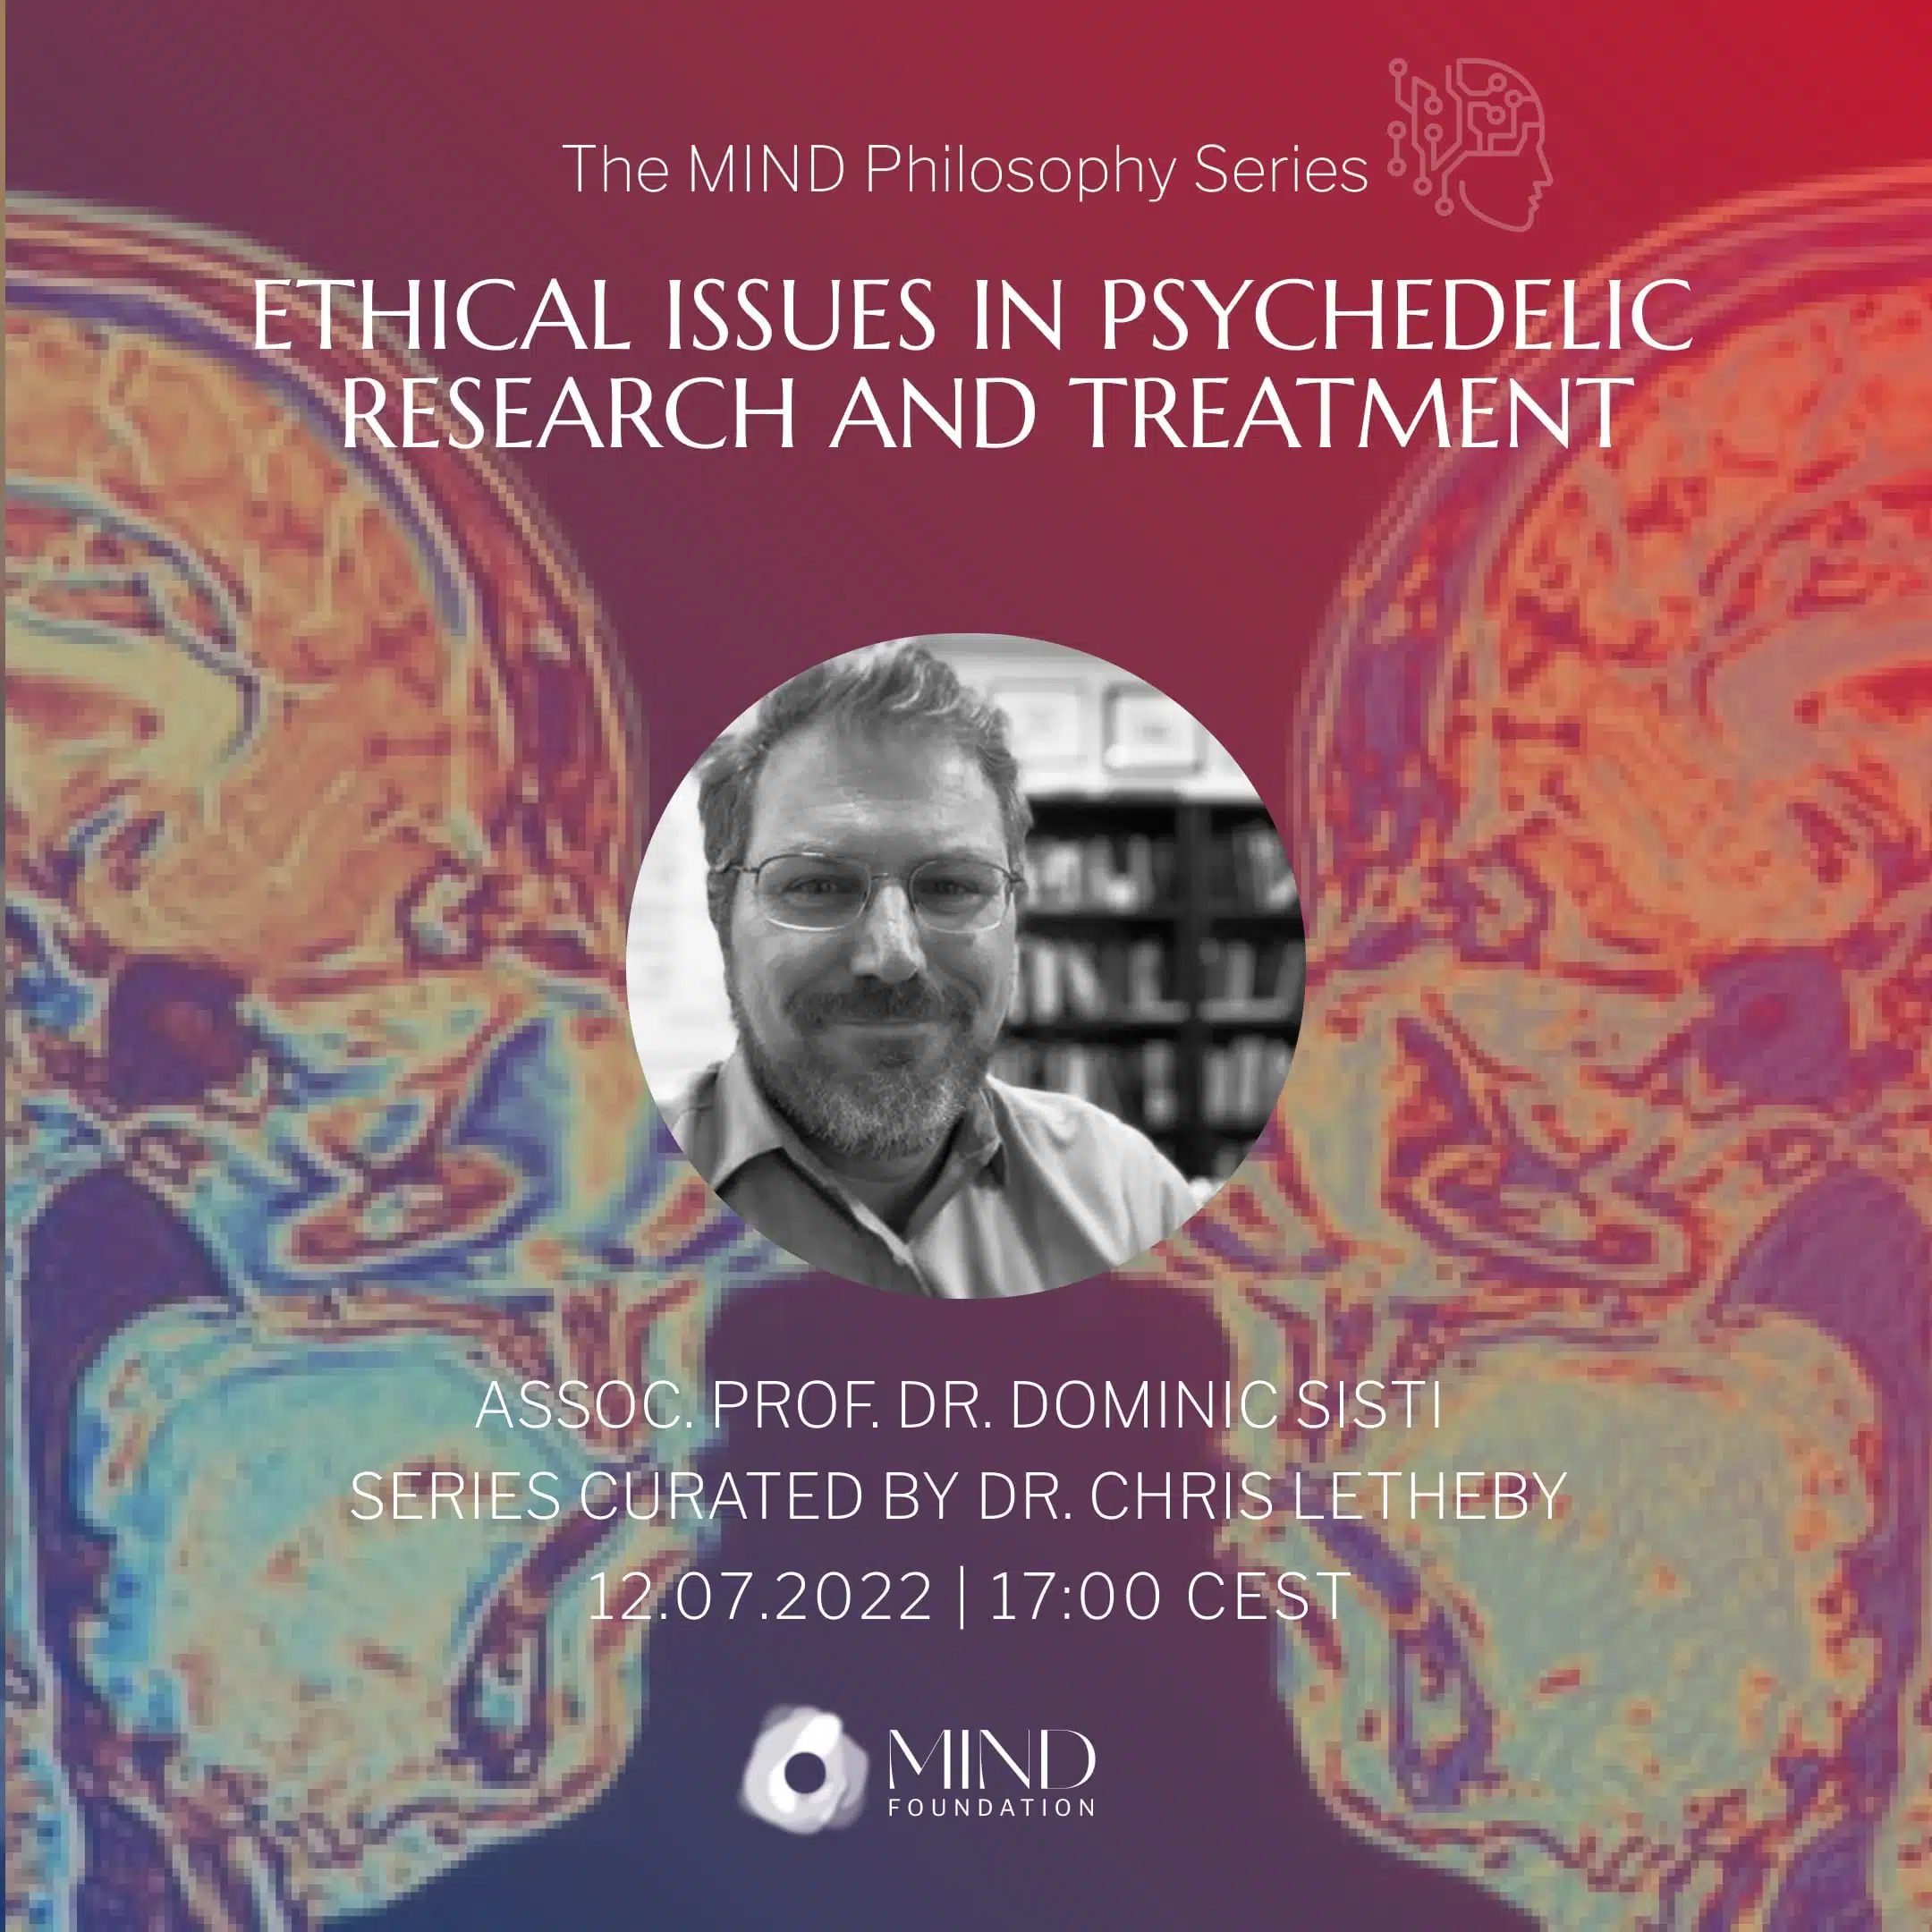 Assoc. Prof. Dr. Dominic Sisti – Ethical Issues in Psychedelic Research and Treatment